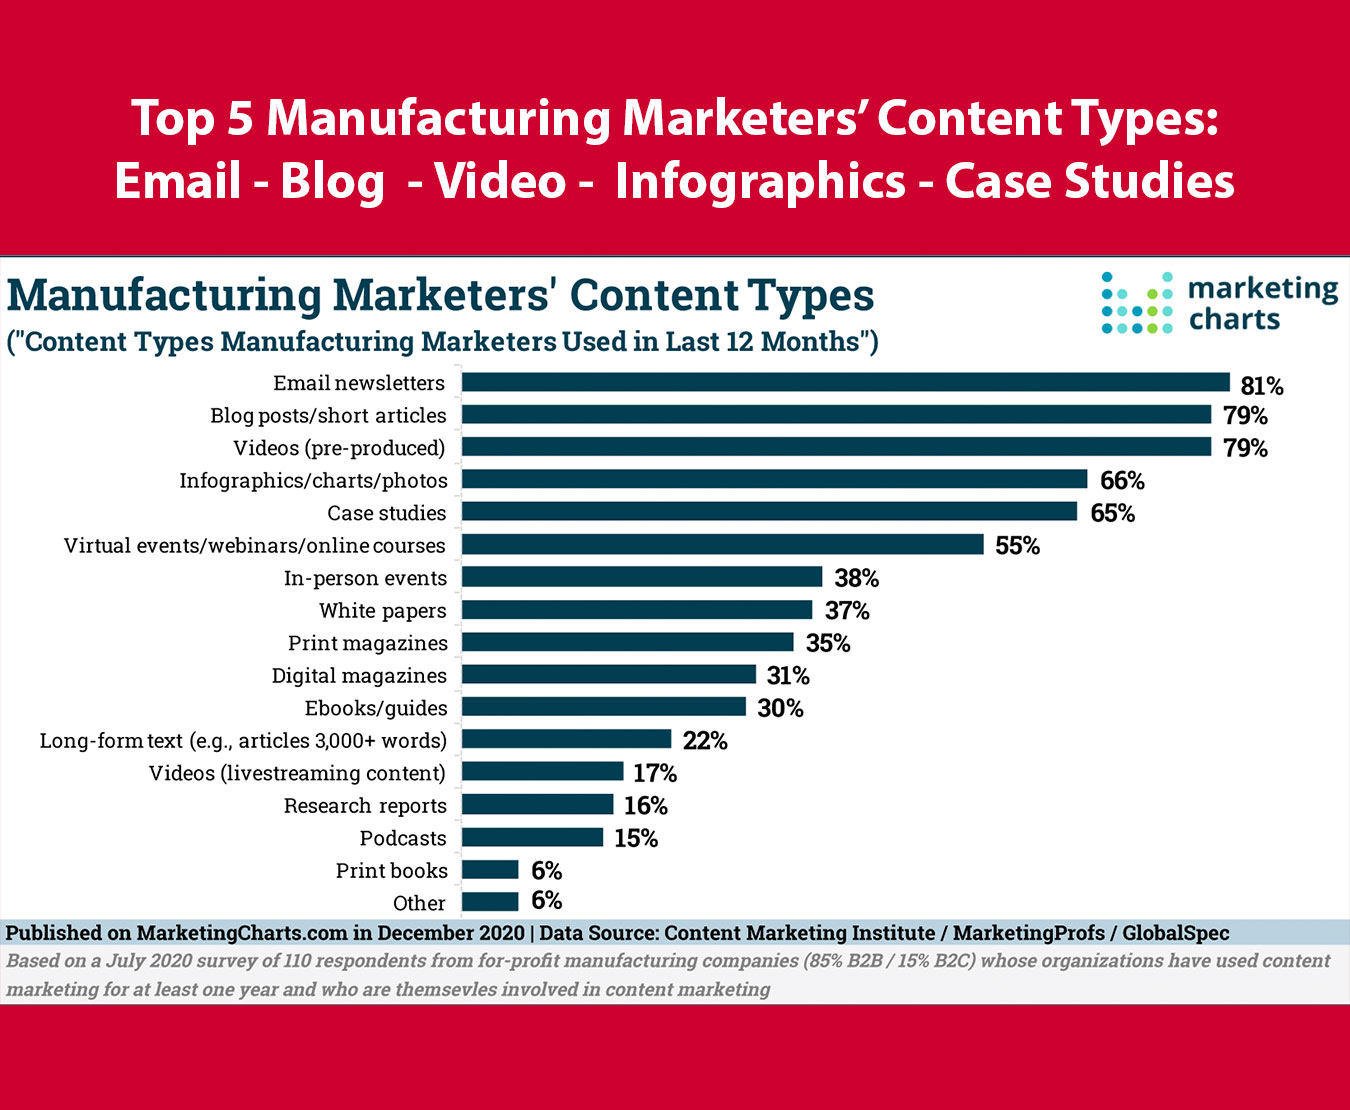 manufacturing marketing action items - graph shows the top content types used by manufacturers: email newsletters (81%), blog posts/short articles (79%), pre-produced video (79%), infographics (66%), and case studies (65%)